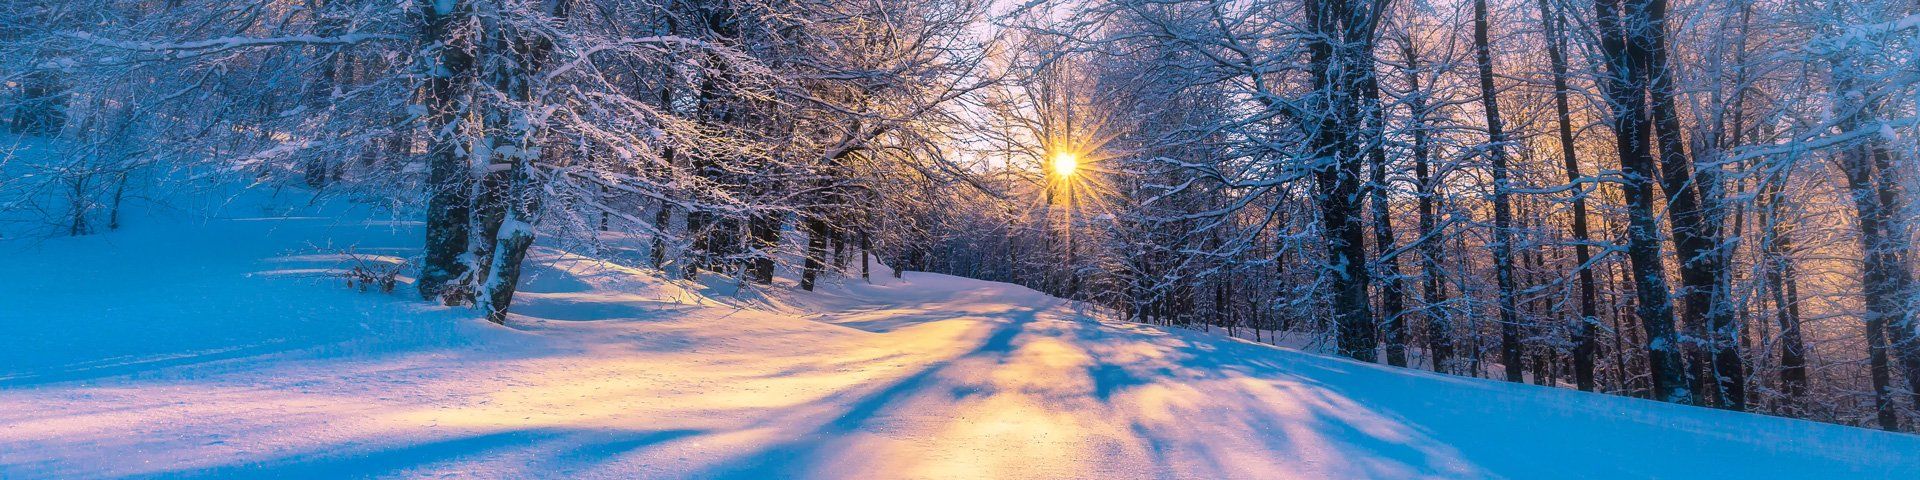 The sun sets behind a snow-covered forest.